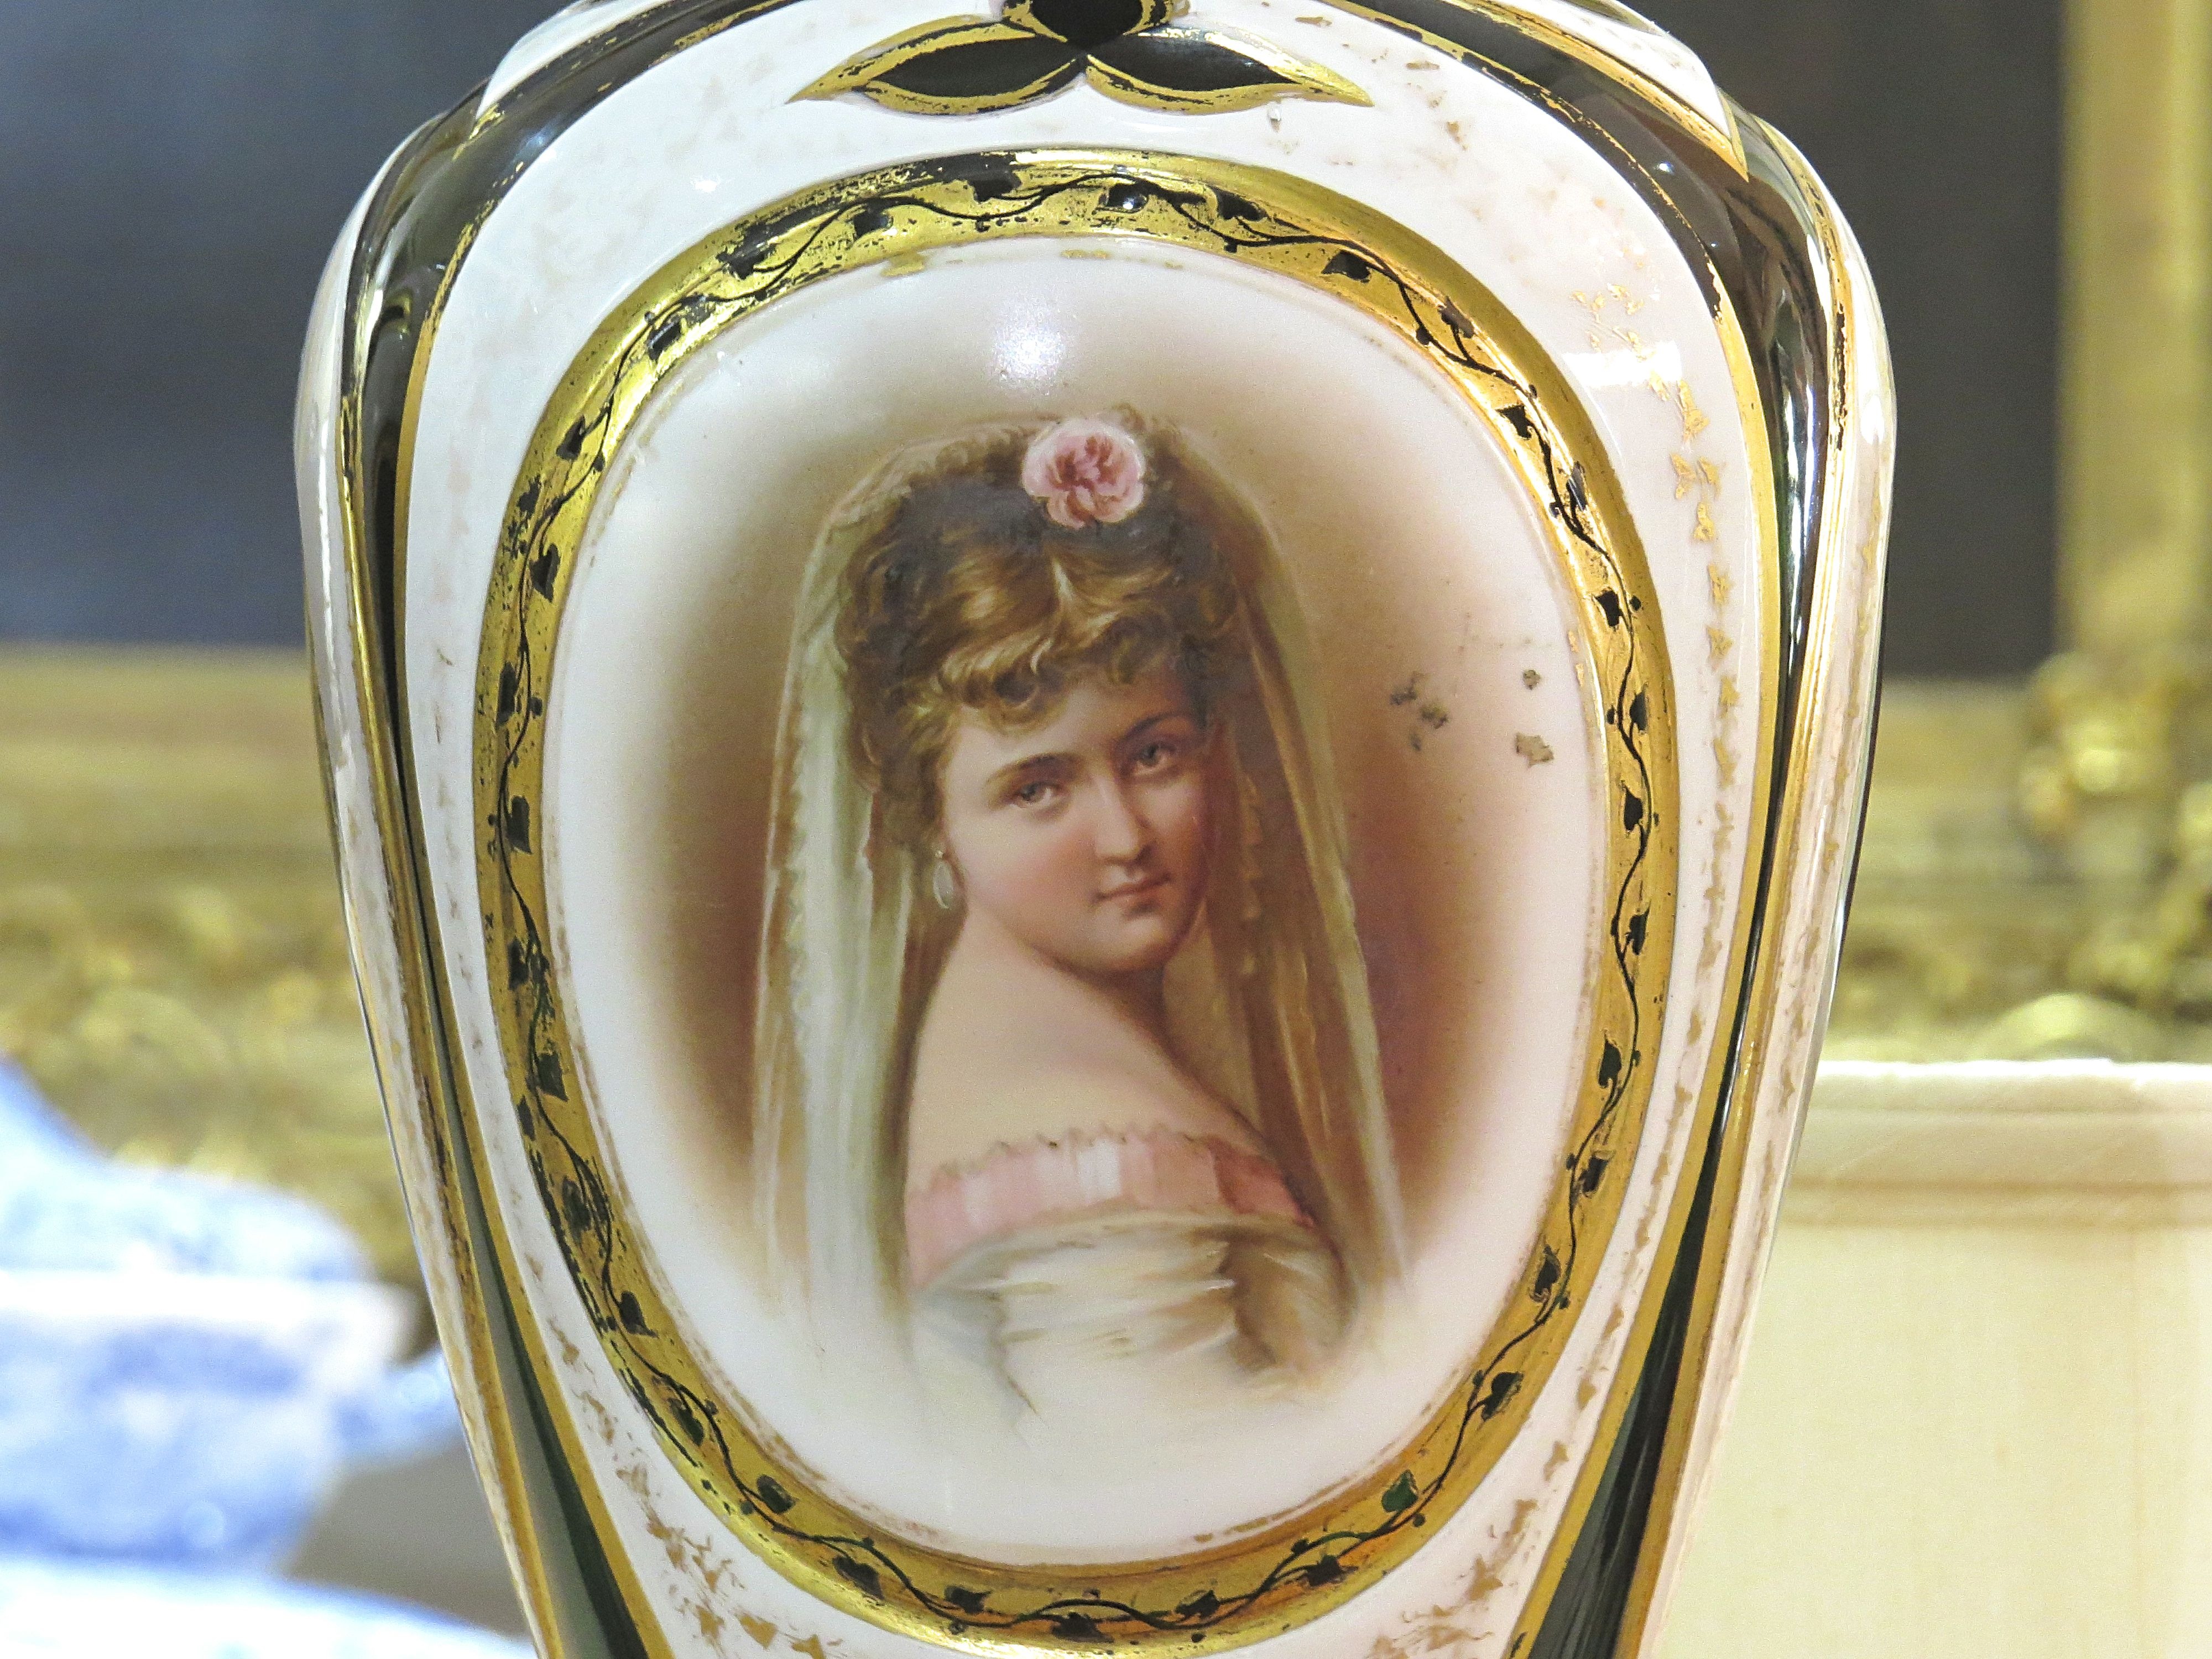 Pair of Spanish Porcelain Lamps with Female Portraits